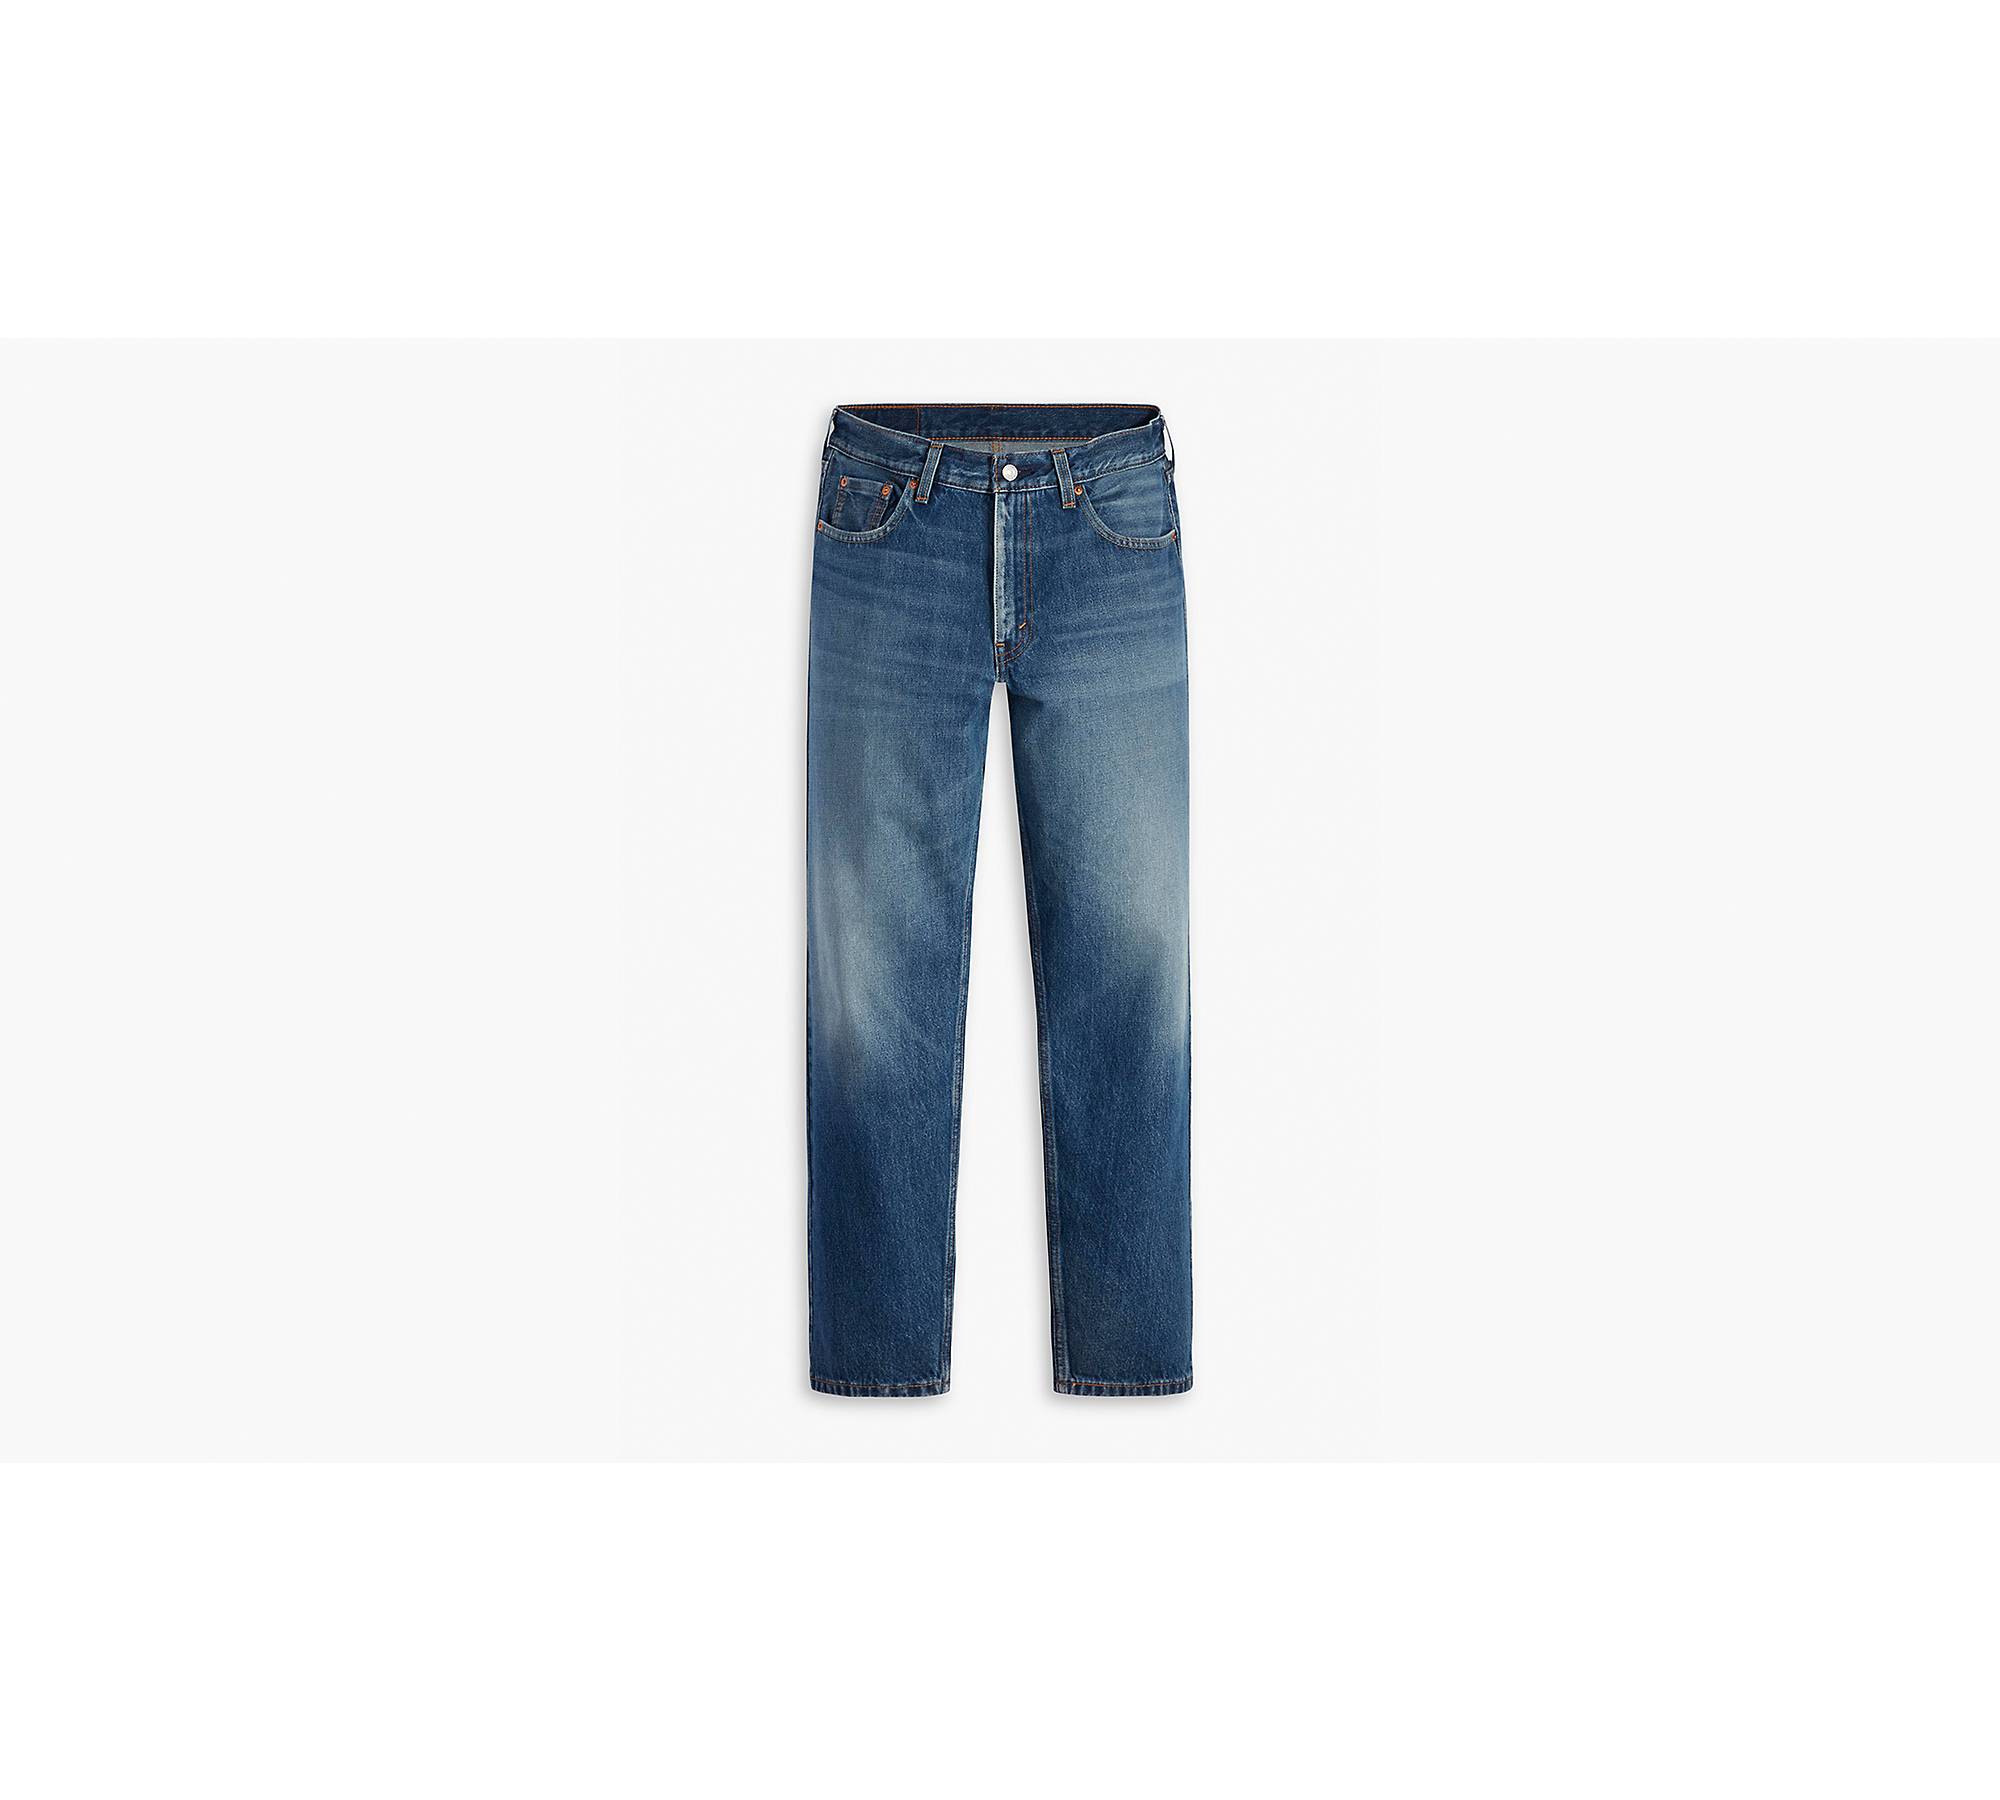 550™ '92 Relaxed Taper Fit Men's Jeans - Dark Wash | Levi's® US